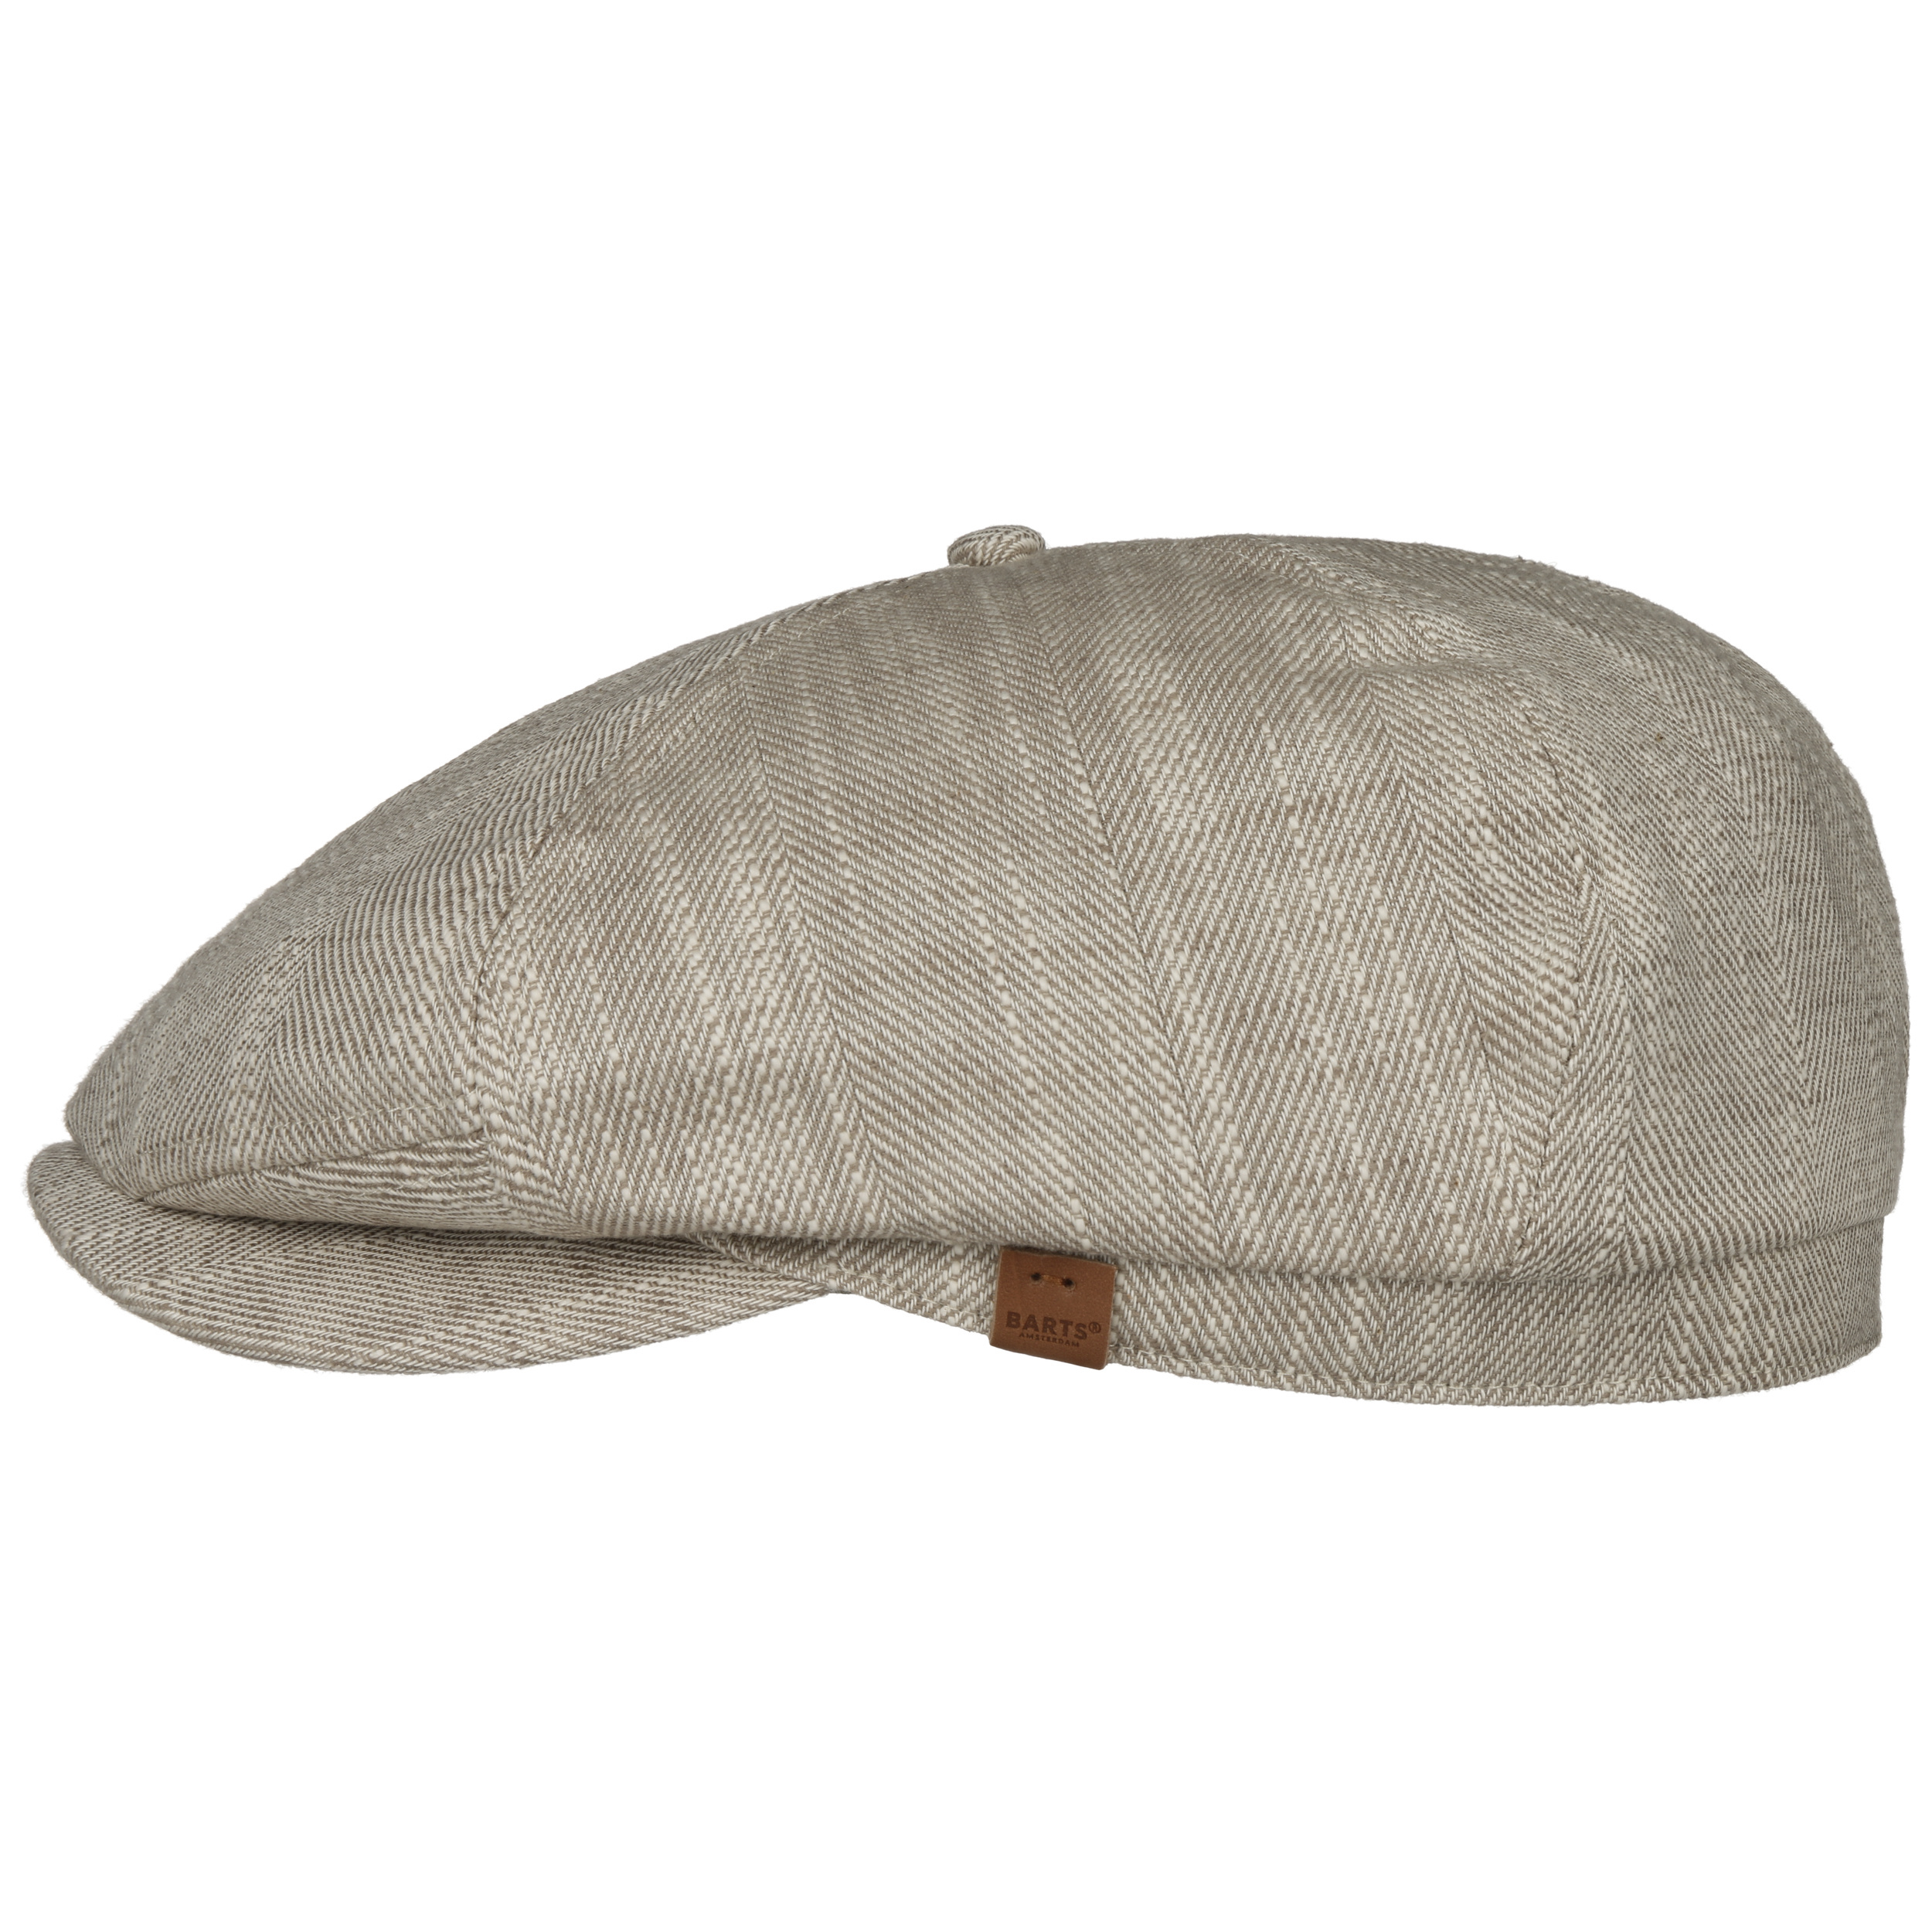 Casquette Plate Mélange Jamaica by Barts - 33,95 CHF